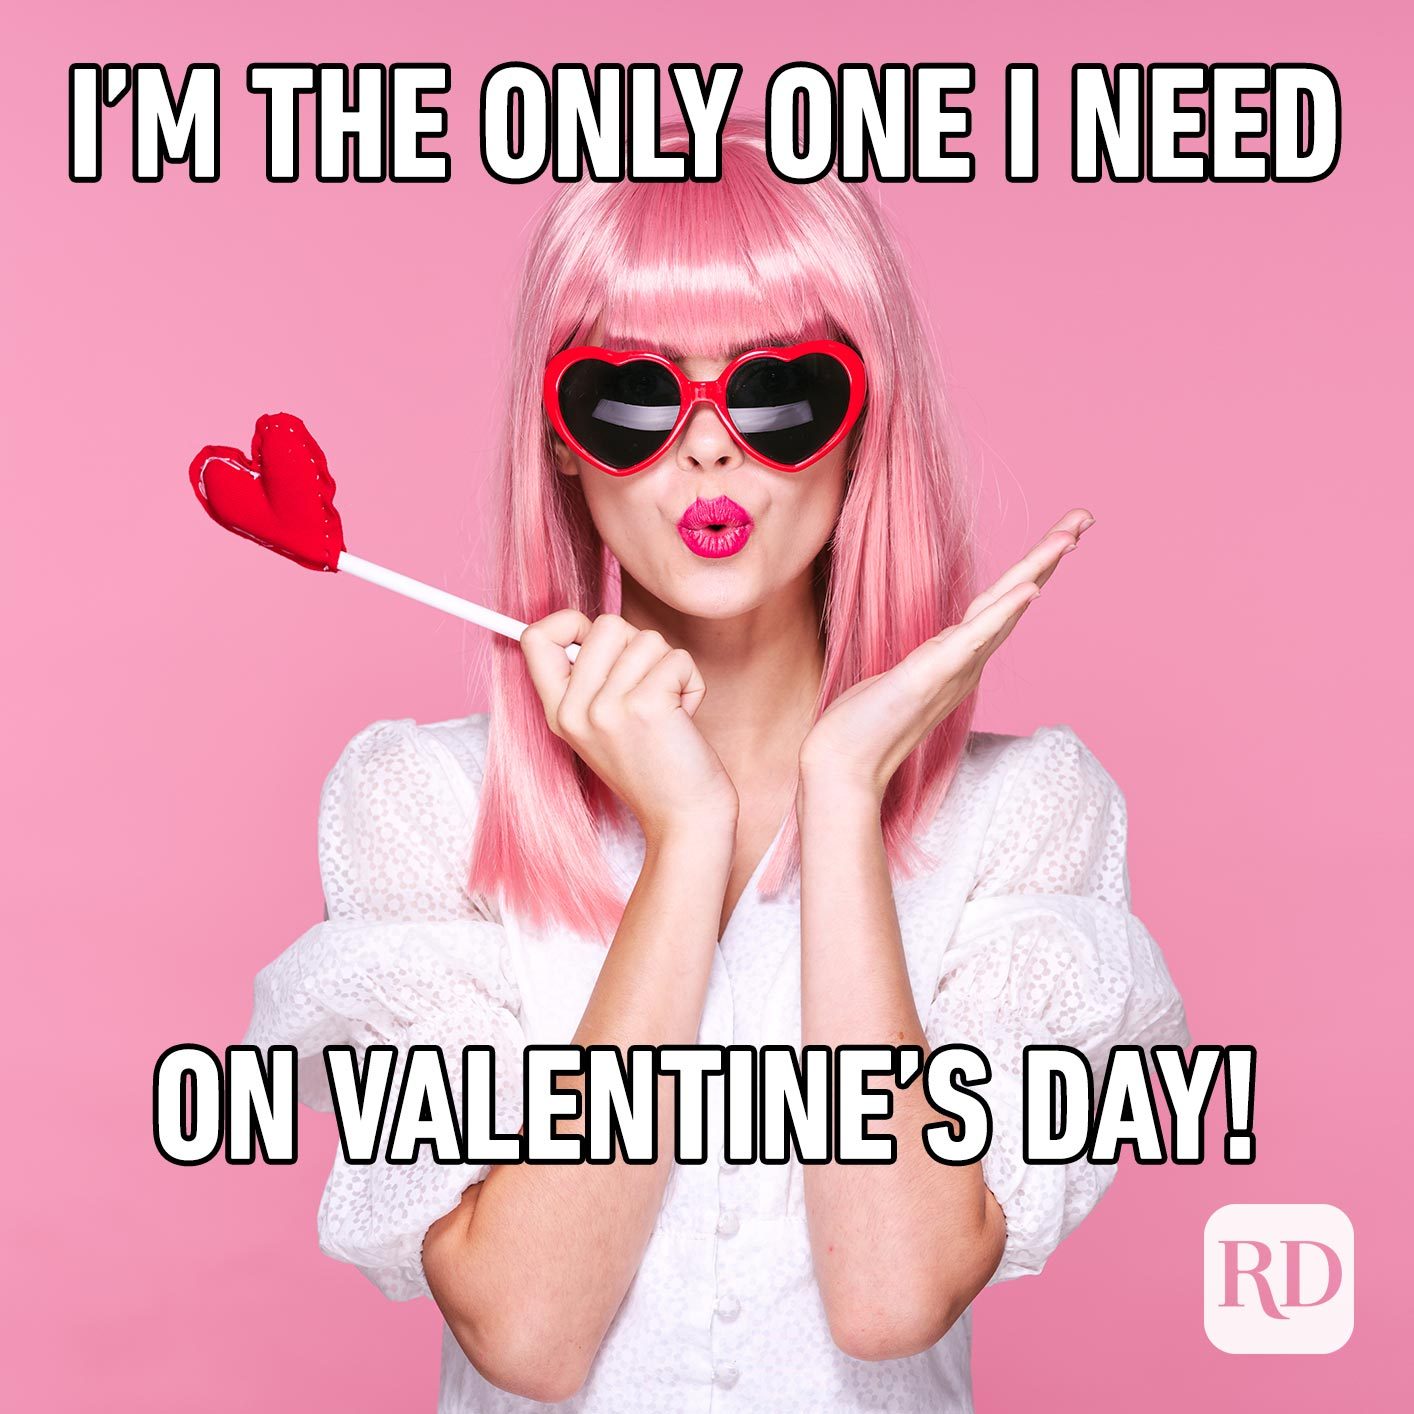 Woman in pink wig with heart-shaped sunglasses. Meme text: I'm the only one I need on Valentine's day.